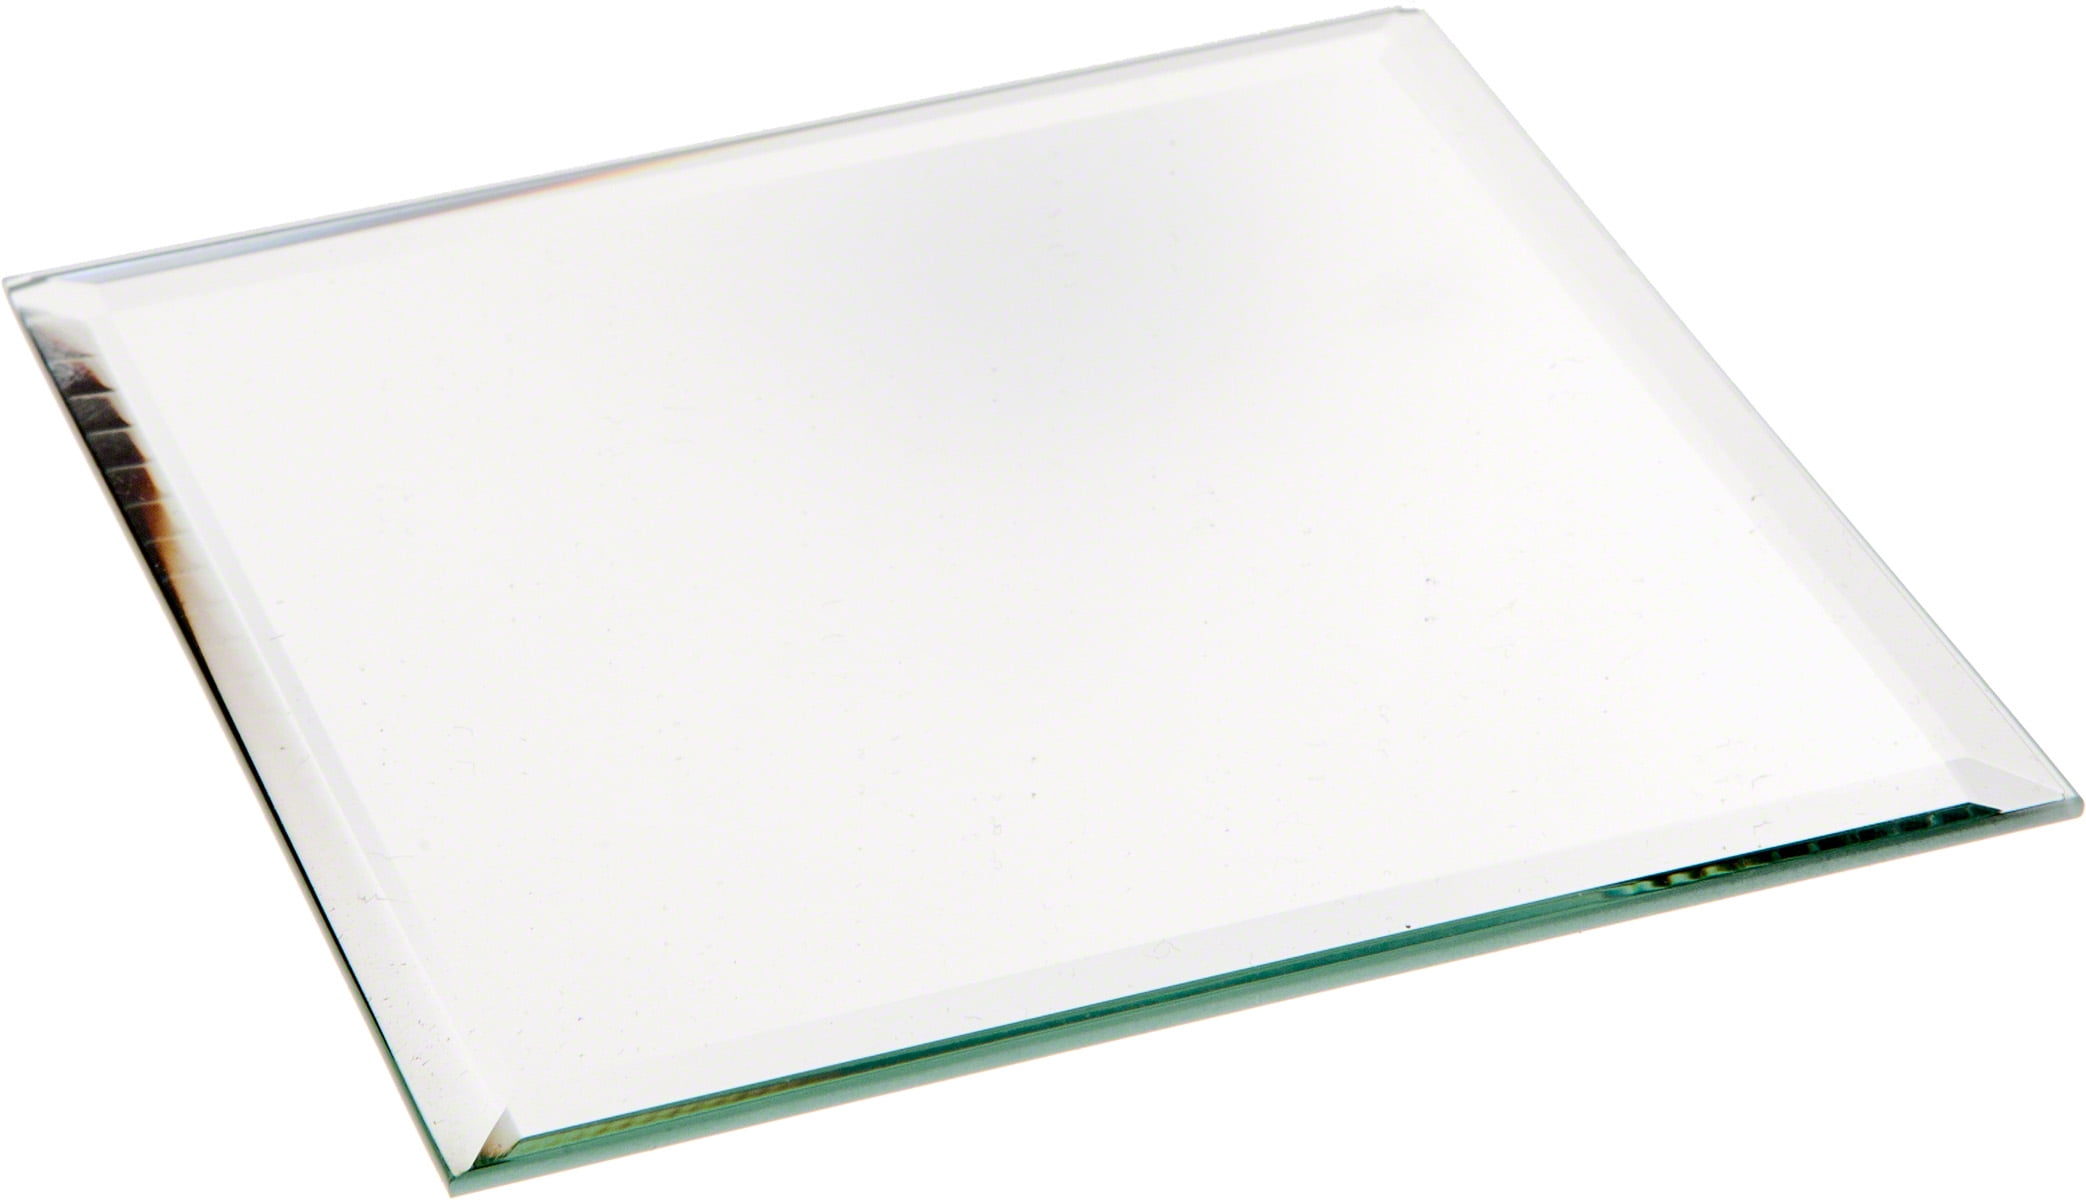 Plymor Rectangle 3mm Beveled Glass Mirror Pack of 3 5 inch x 7 inch